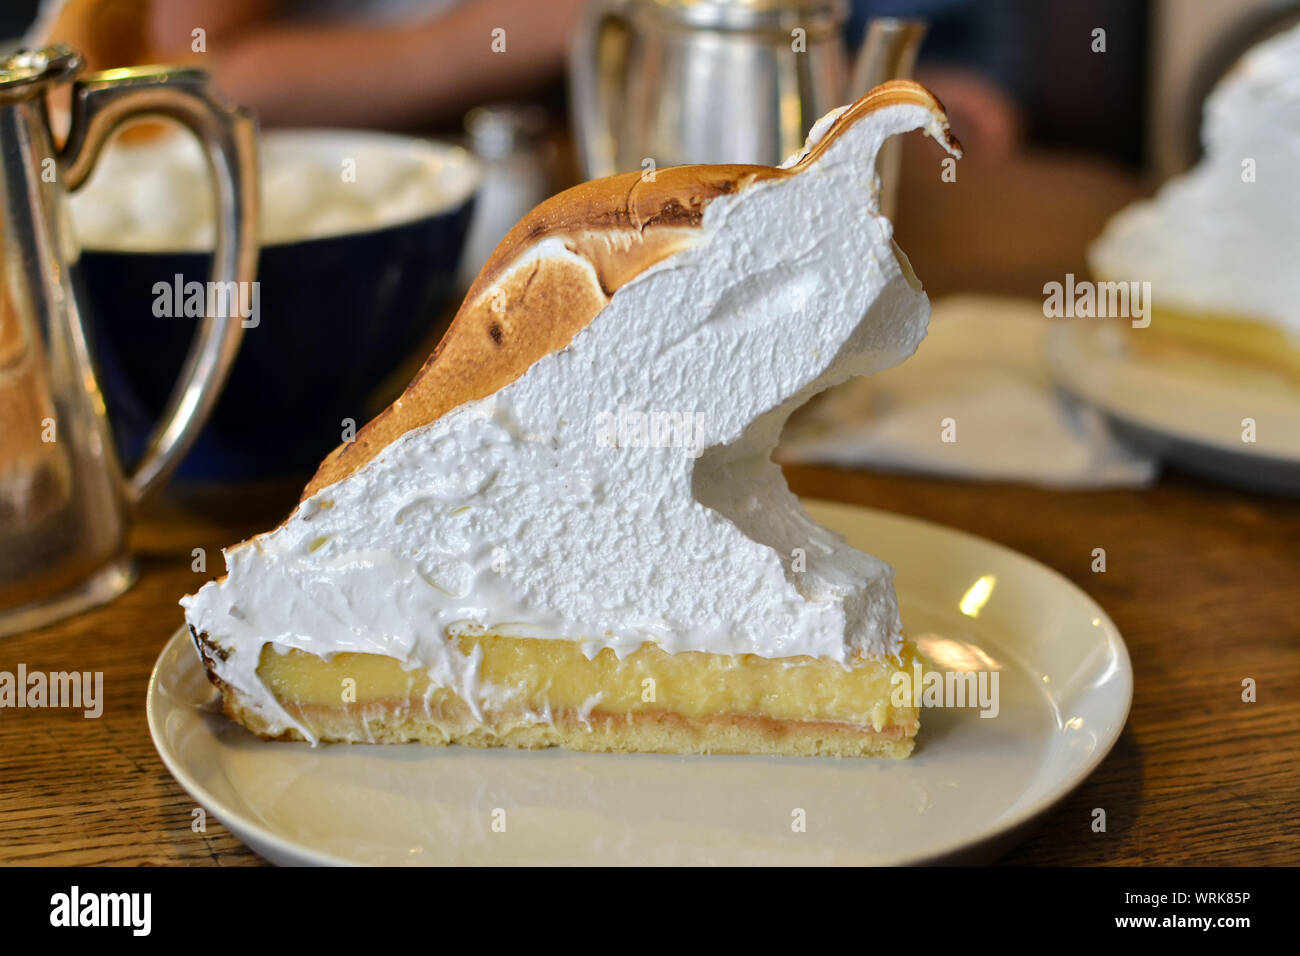 Gigantic piece of yummy lemon meringue pie on wooden table in a café. Stock Photo